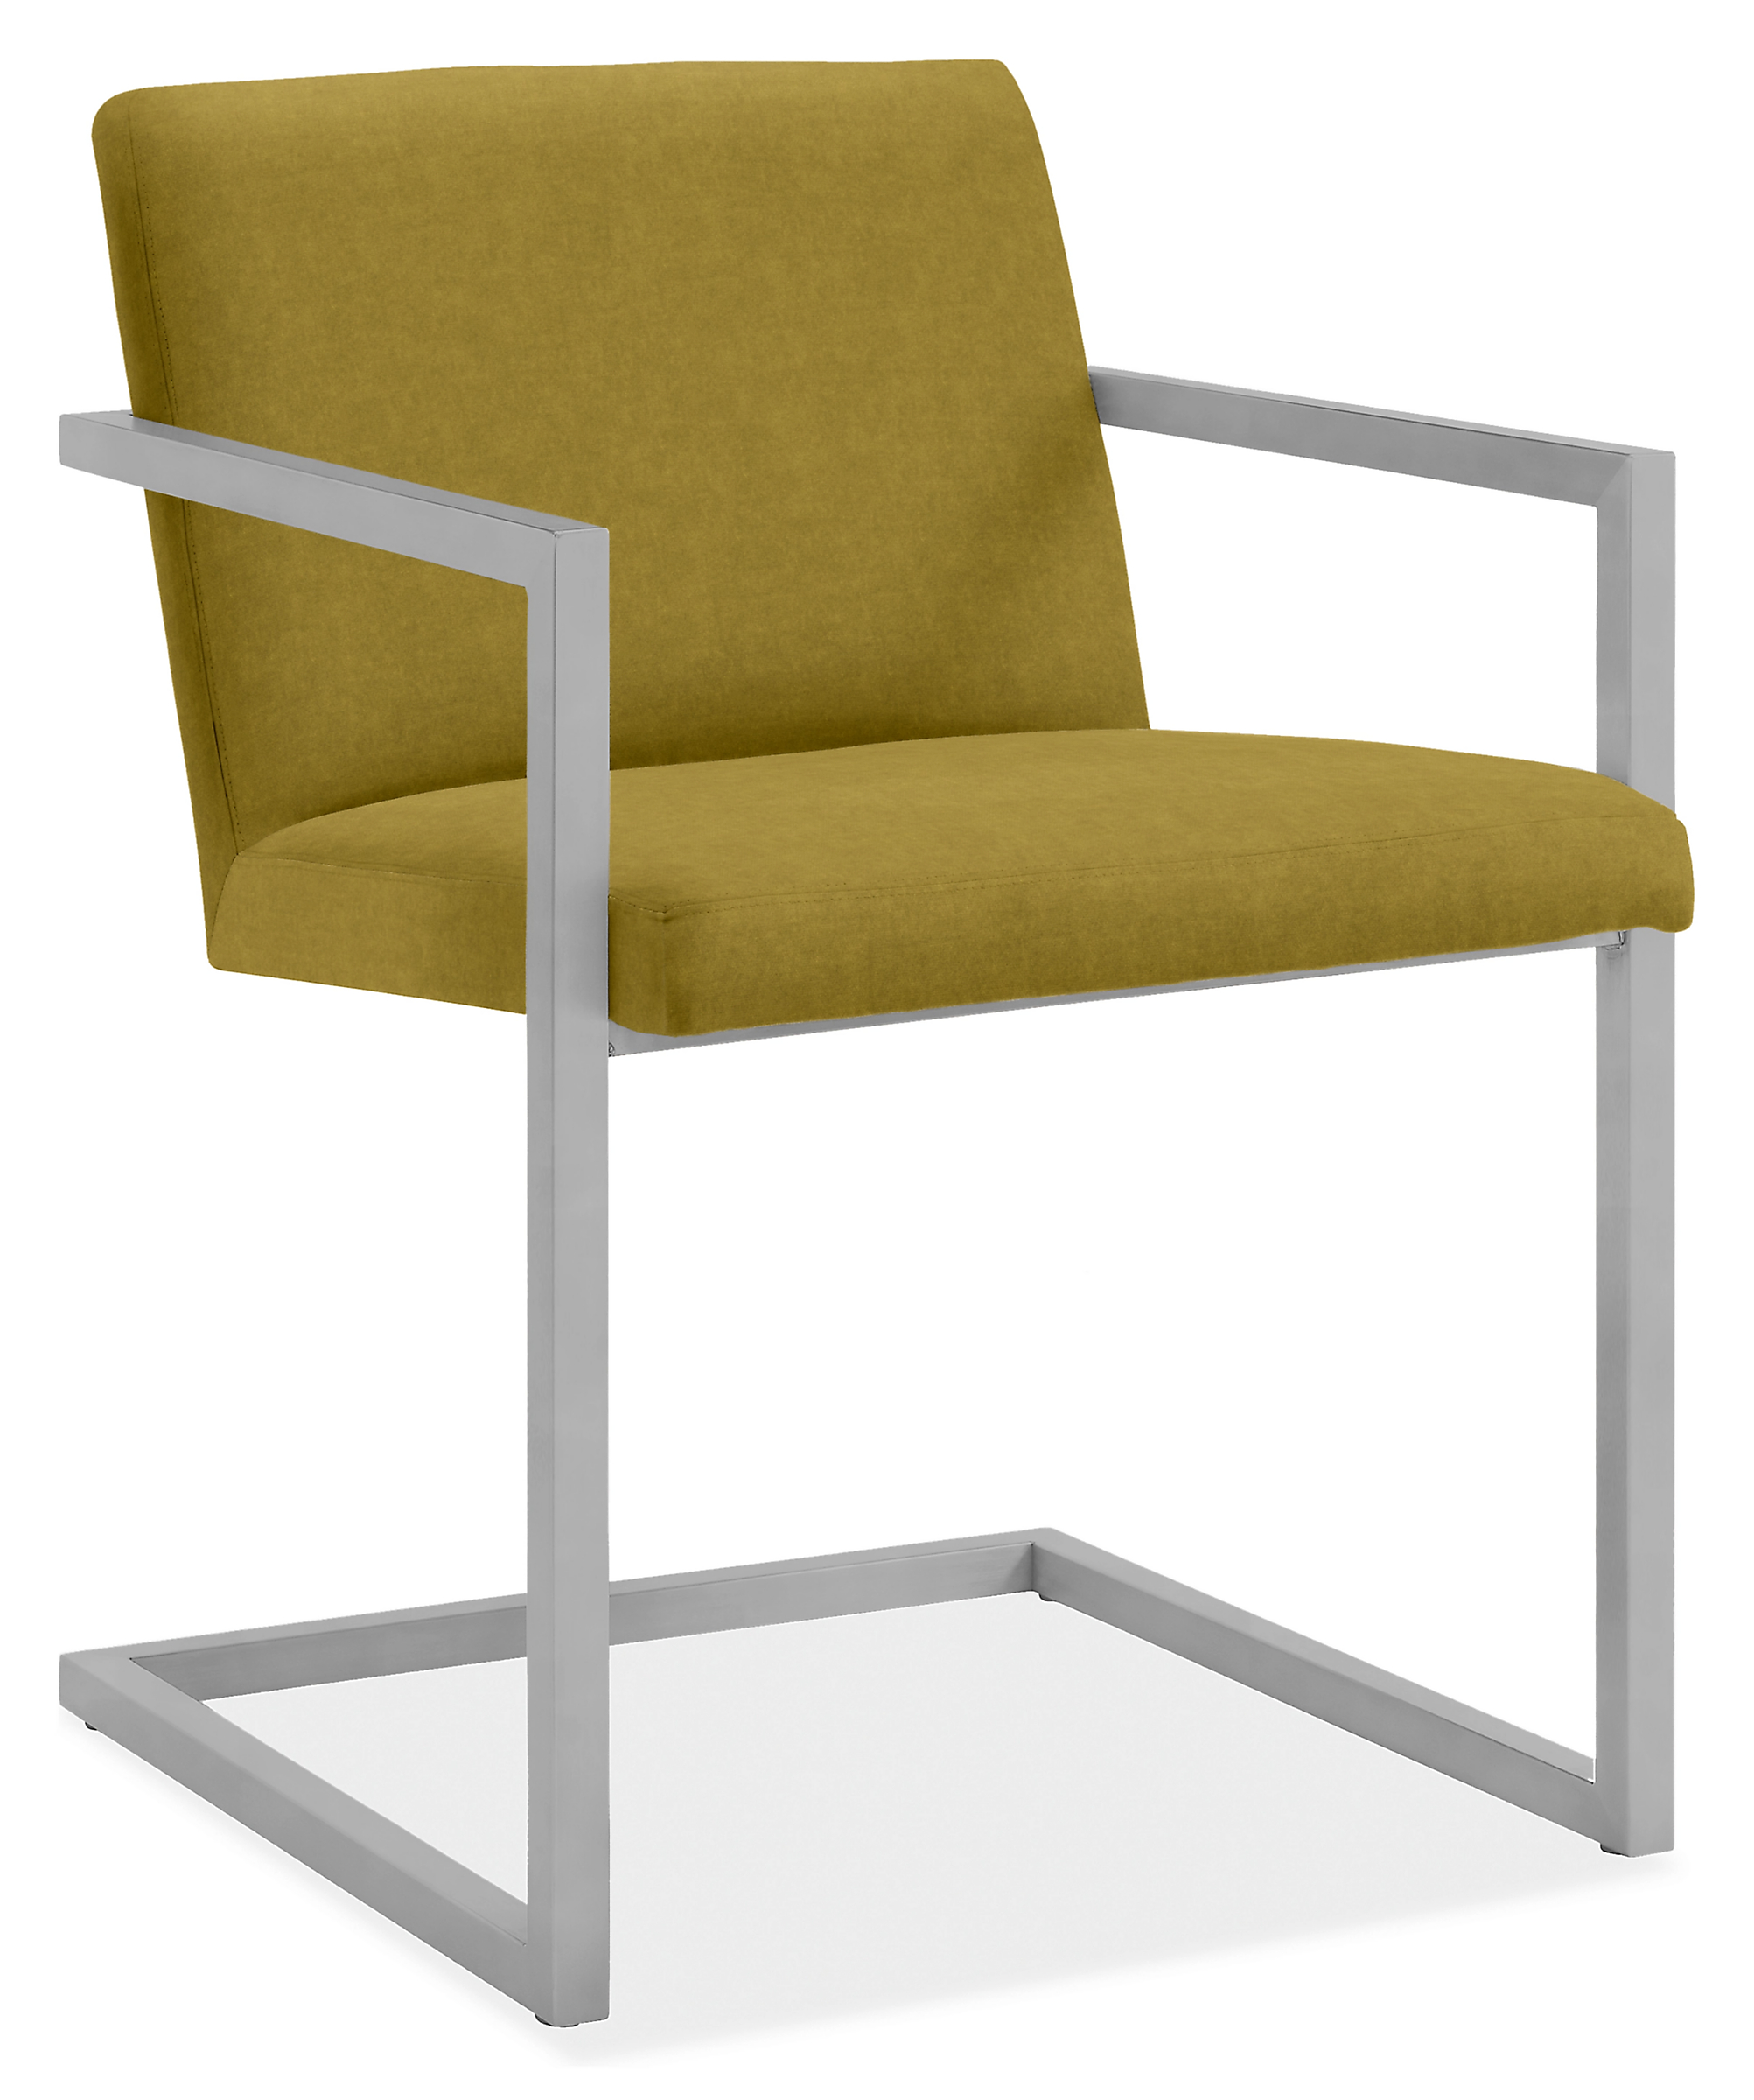 Lira Arm Chair in Vance Mustard with Stainless Steel Frame